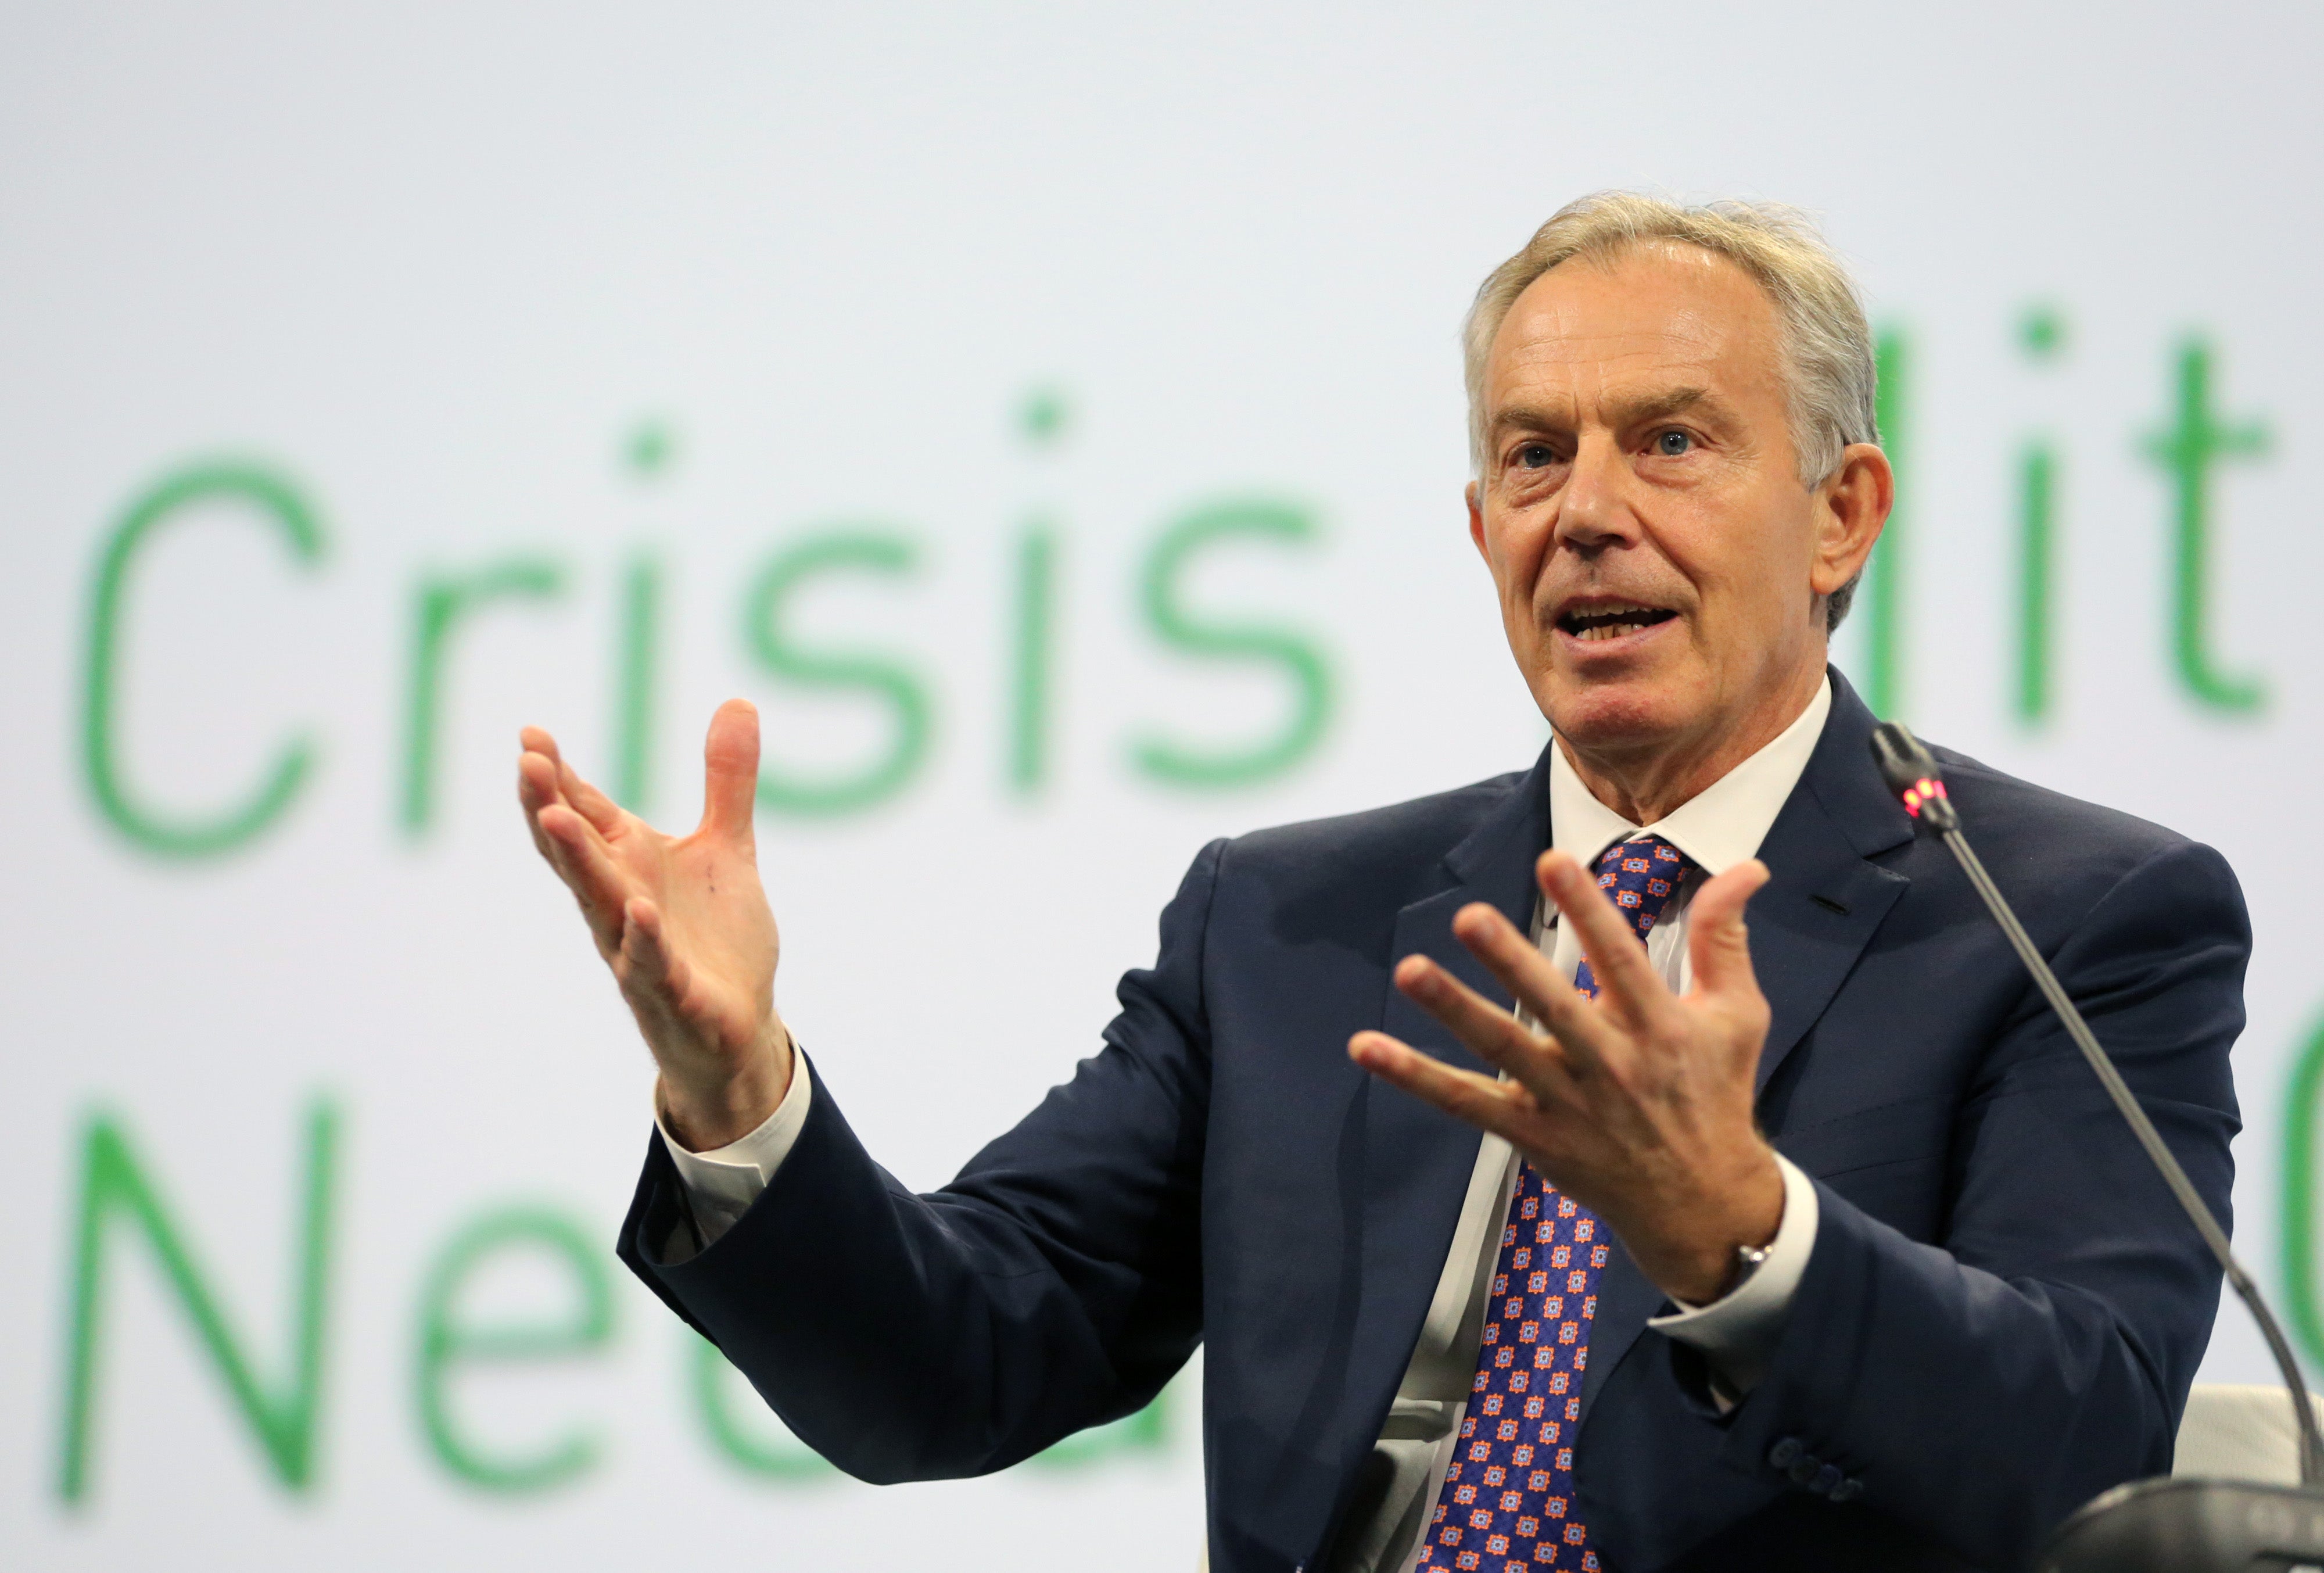 Sir Tony Blair speaking at a session held by Sberbank at the St Petersburg International Economic Forum in June 2015